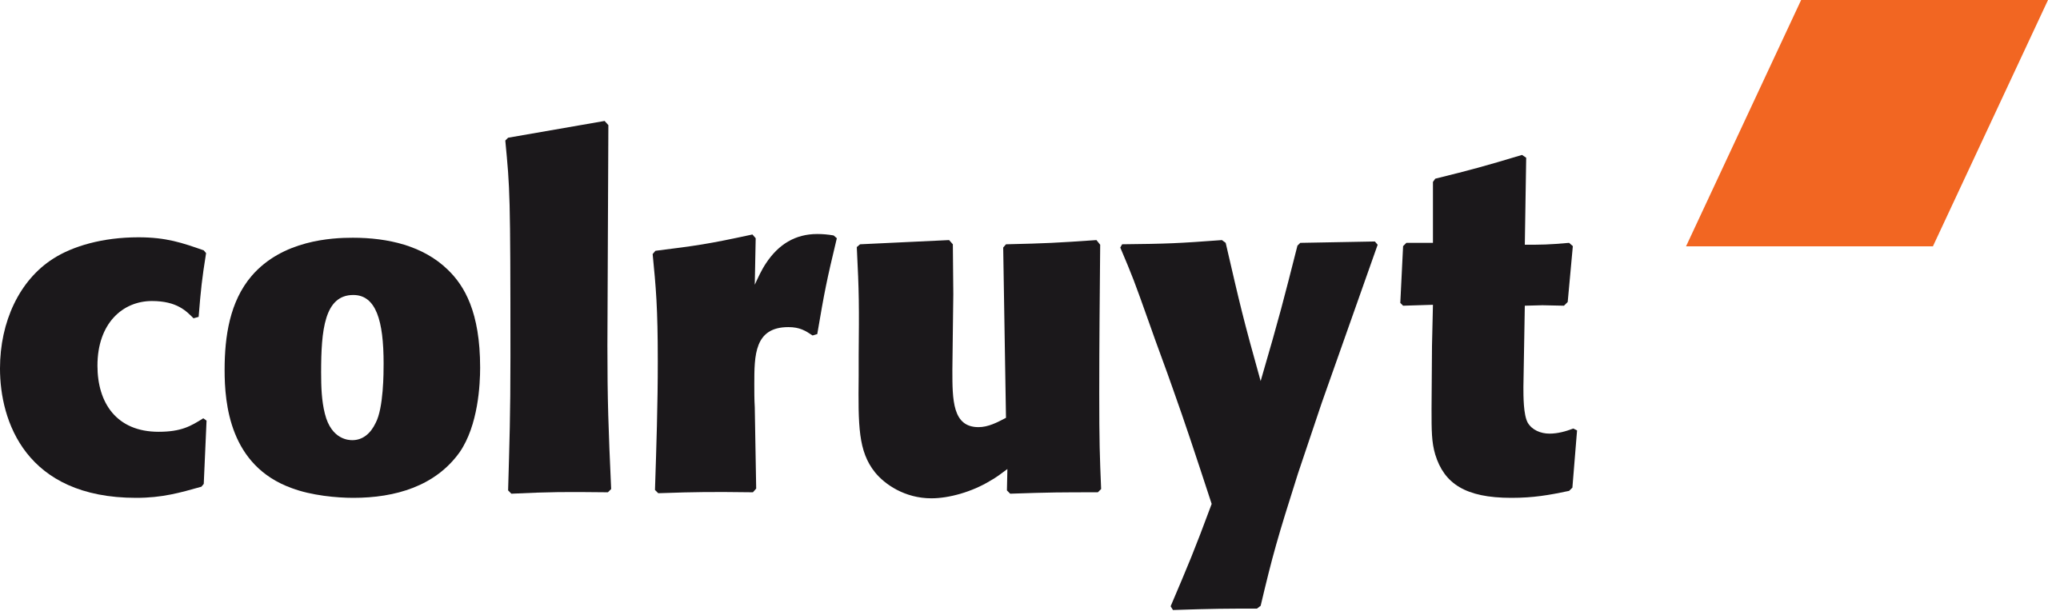 Clients like Colruyt worked with the House of Marketing